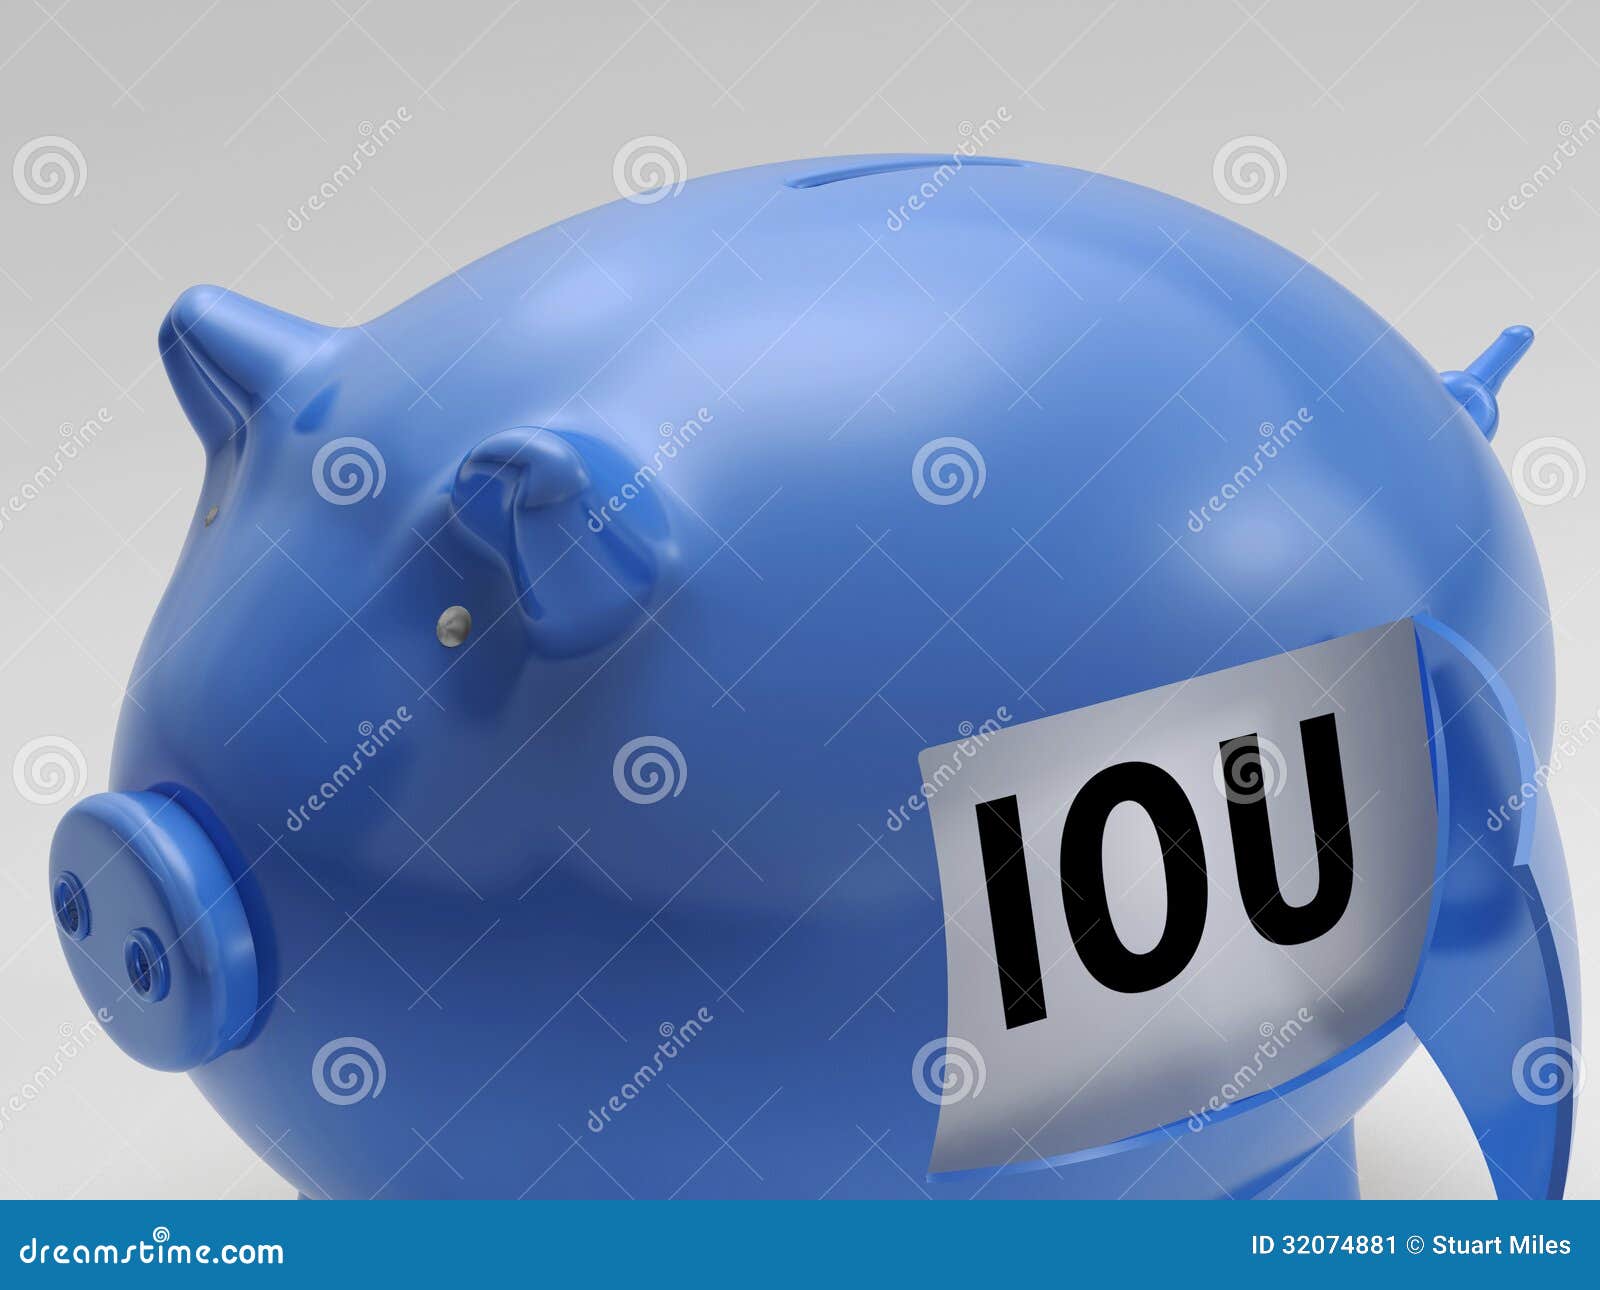 iou in piggy shows borrowing from savings